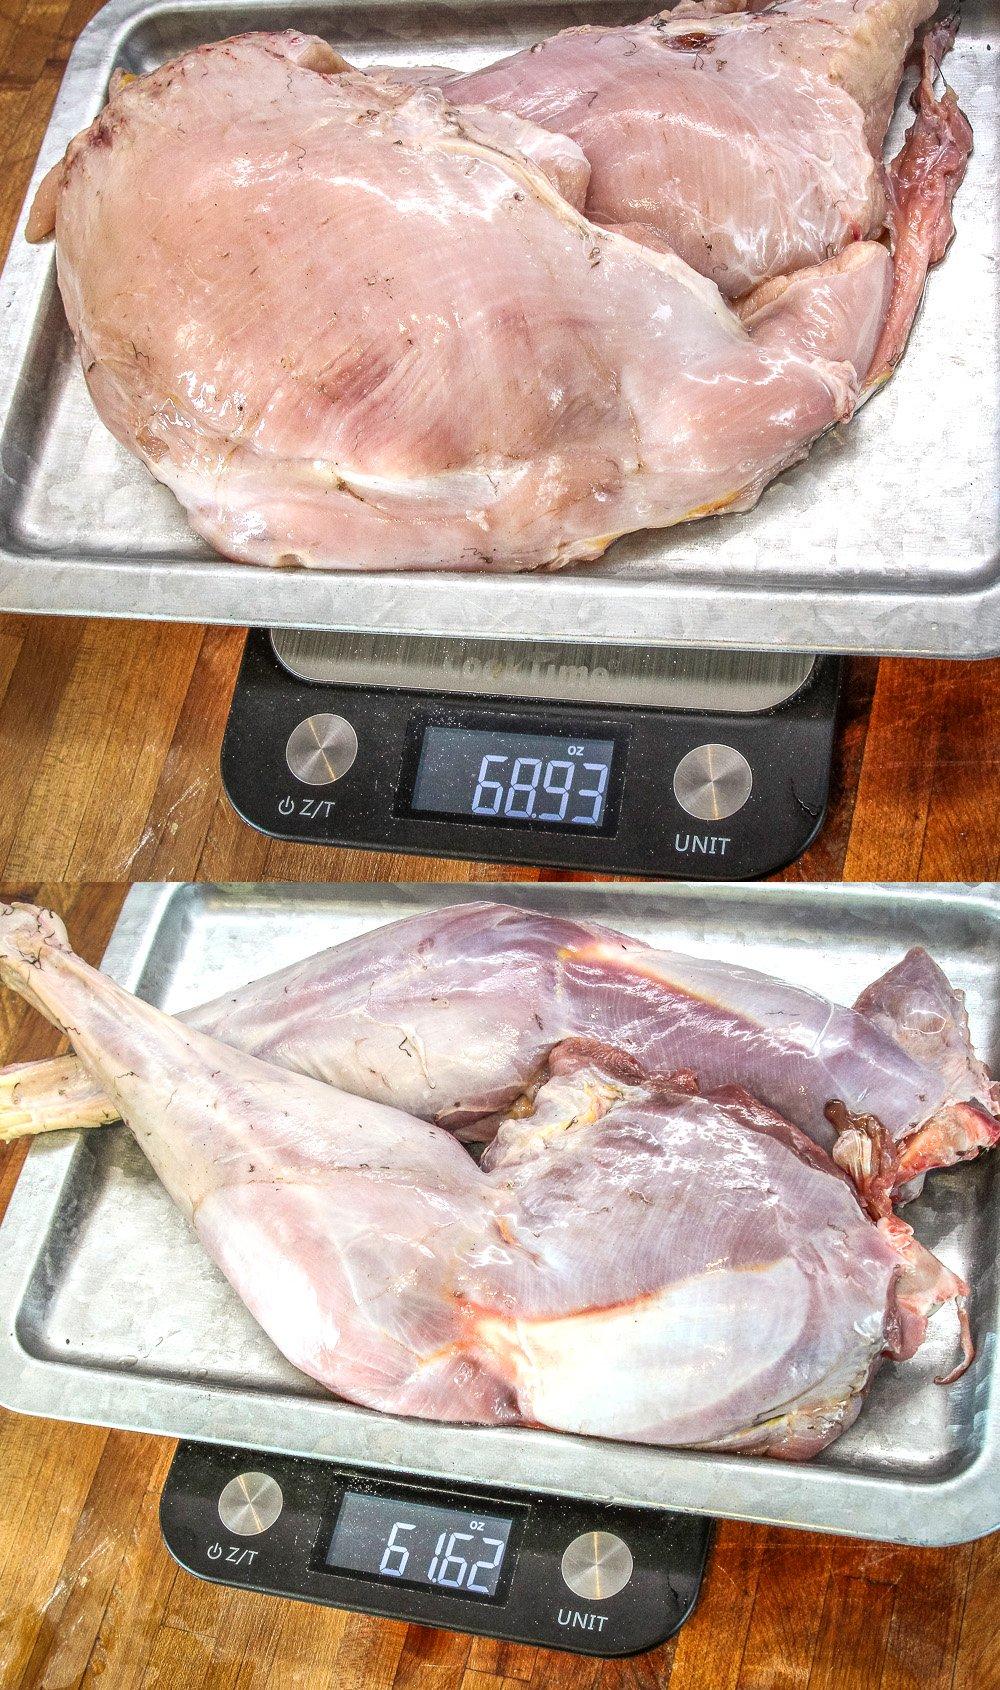 Turkey legs and thighs on an adult gobbler weigh nearly the same as the breast meat.